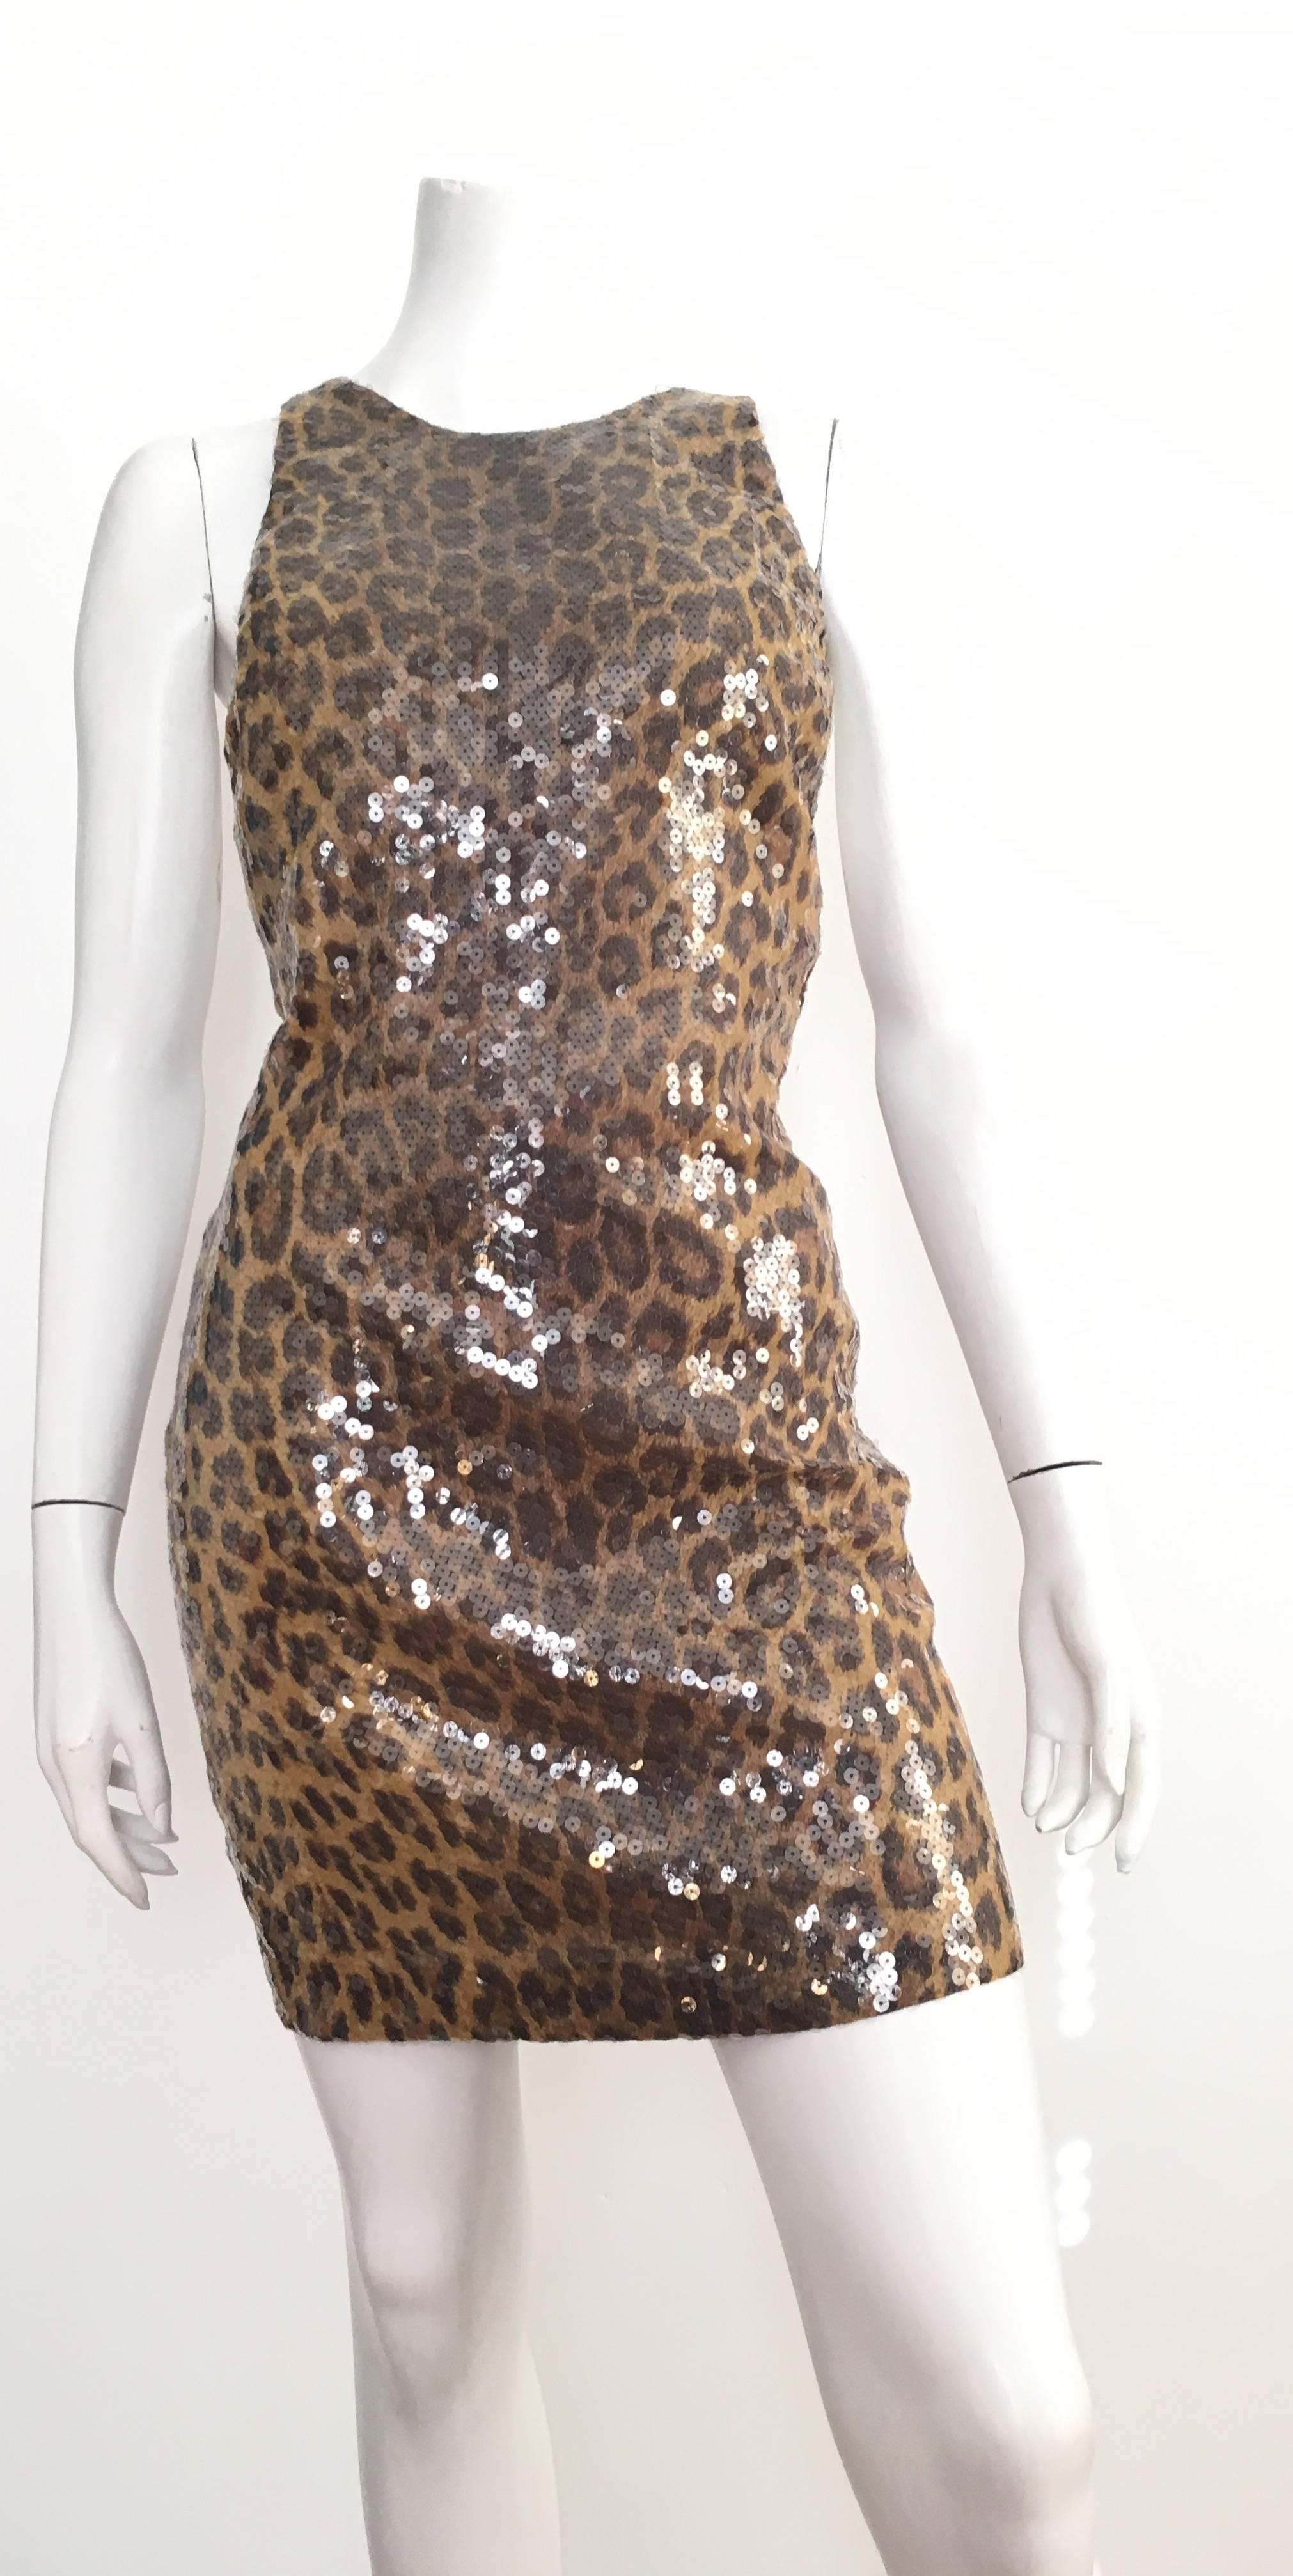 Vera Wang 1980s Sequin Cheetah Print Cocktail Dress Size 6. For Sale 3